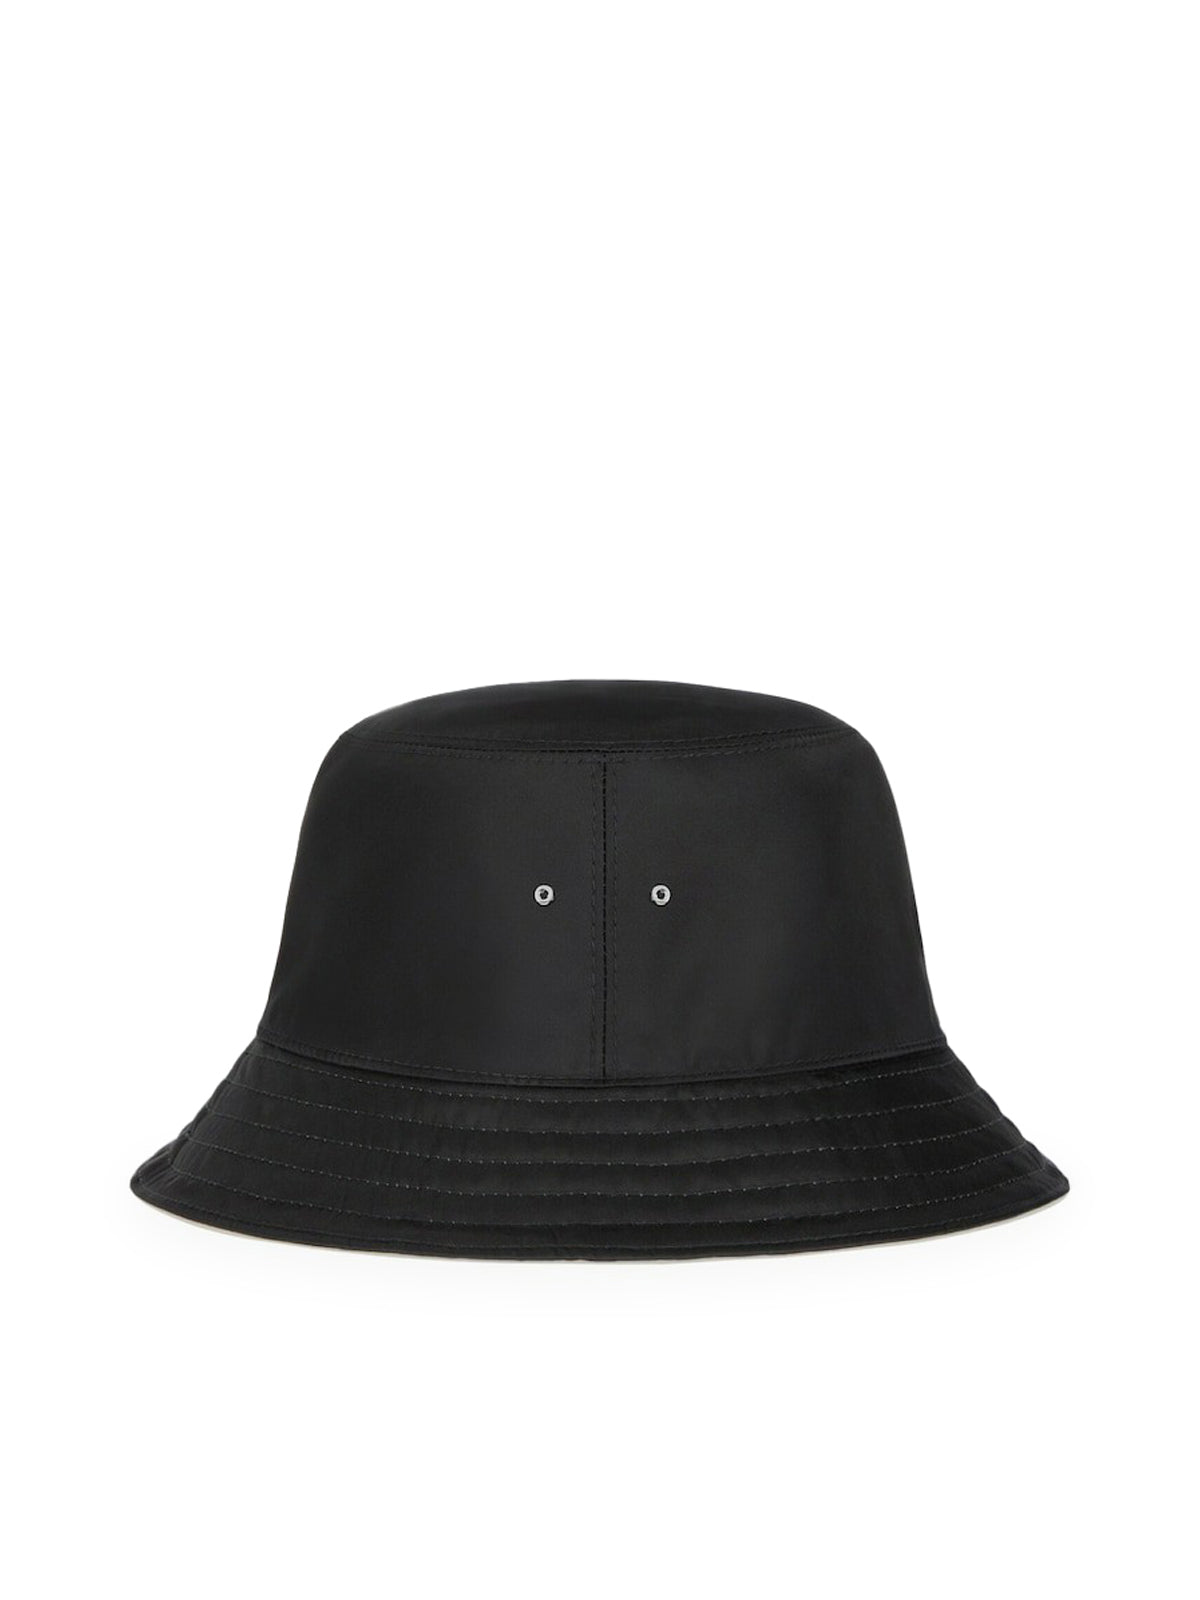 GIVENCHY bucket hat